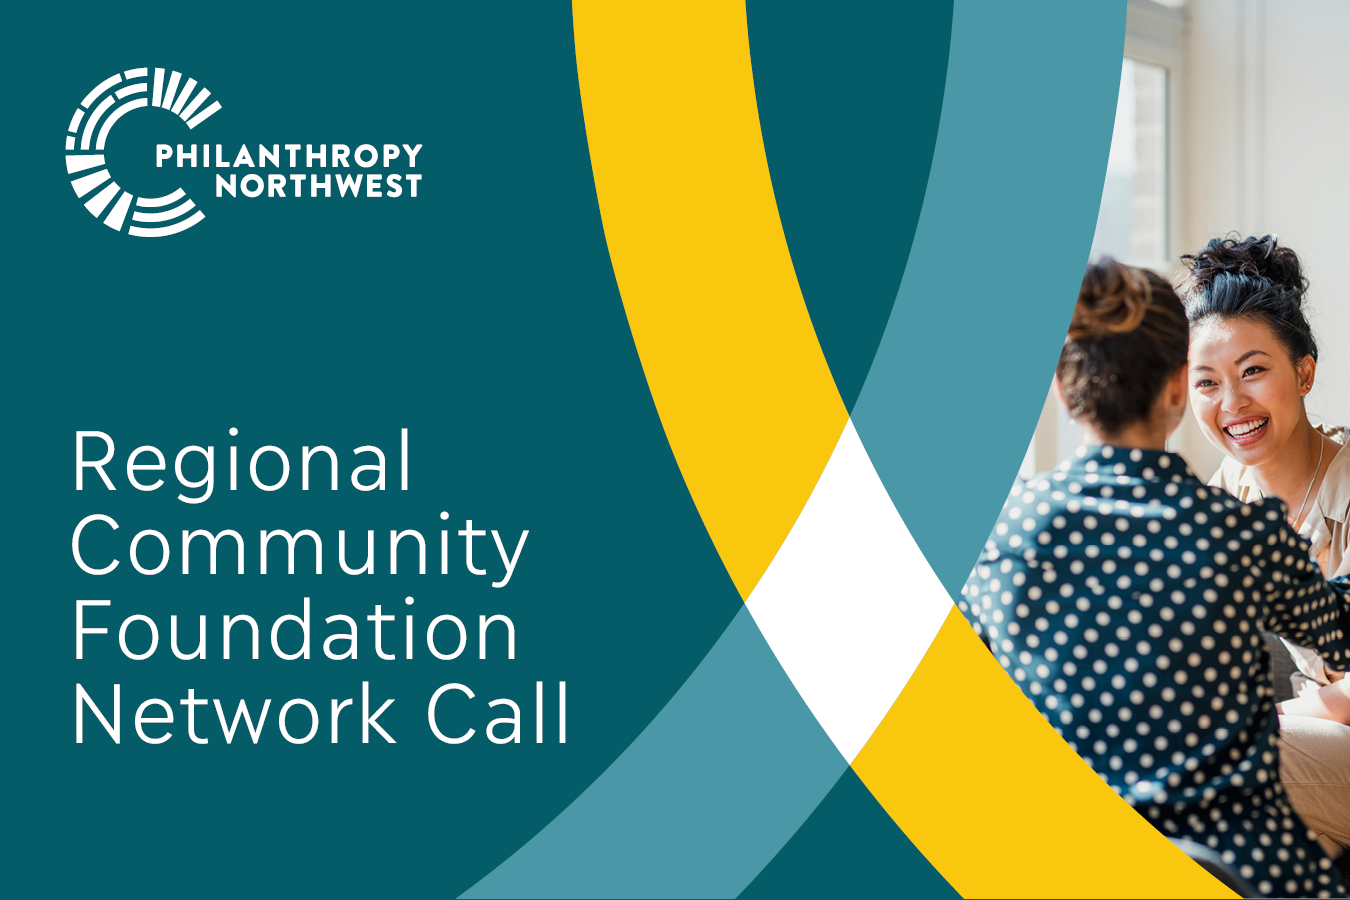 Event banner that says "Regional Community Foundation Network Call." Graphic ocean-blue background with title in white; across the bottom section two arches in yellow and river-blue intersect to form a white diamond. Photo: two women coworkers laughing.